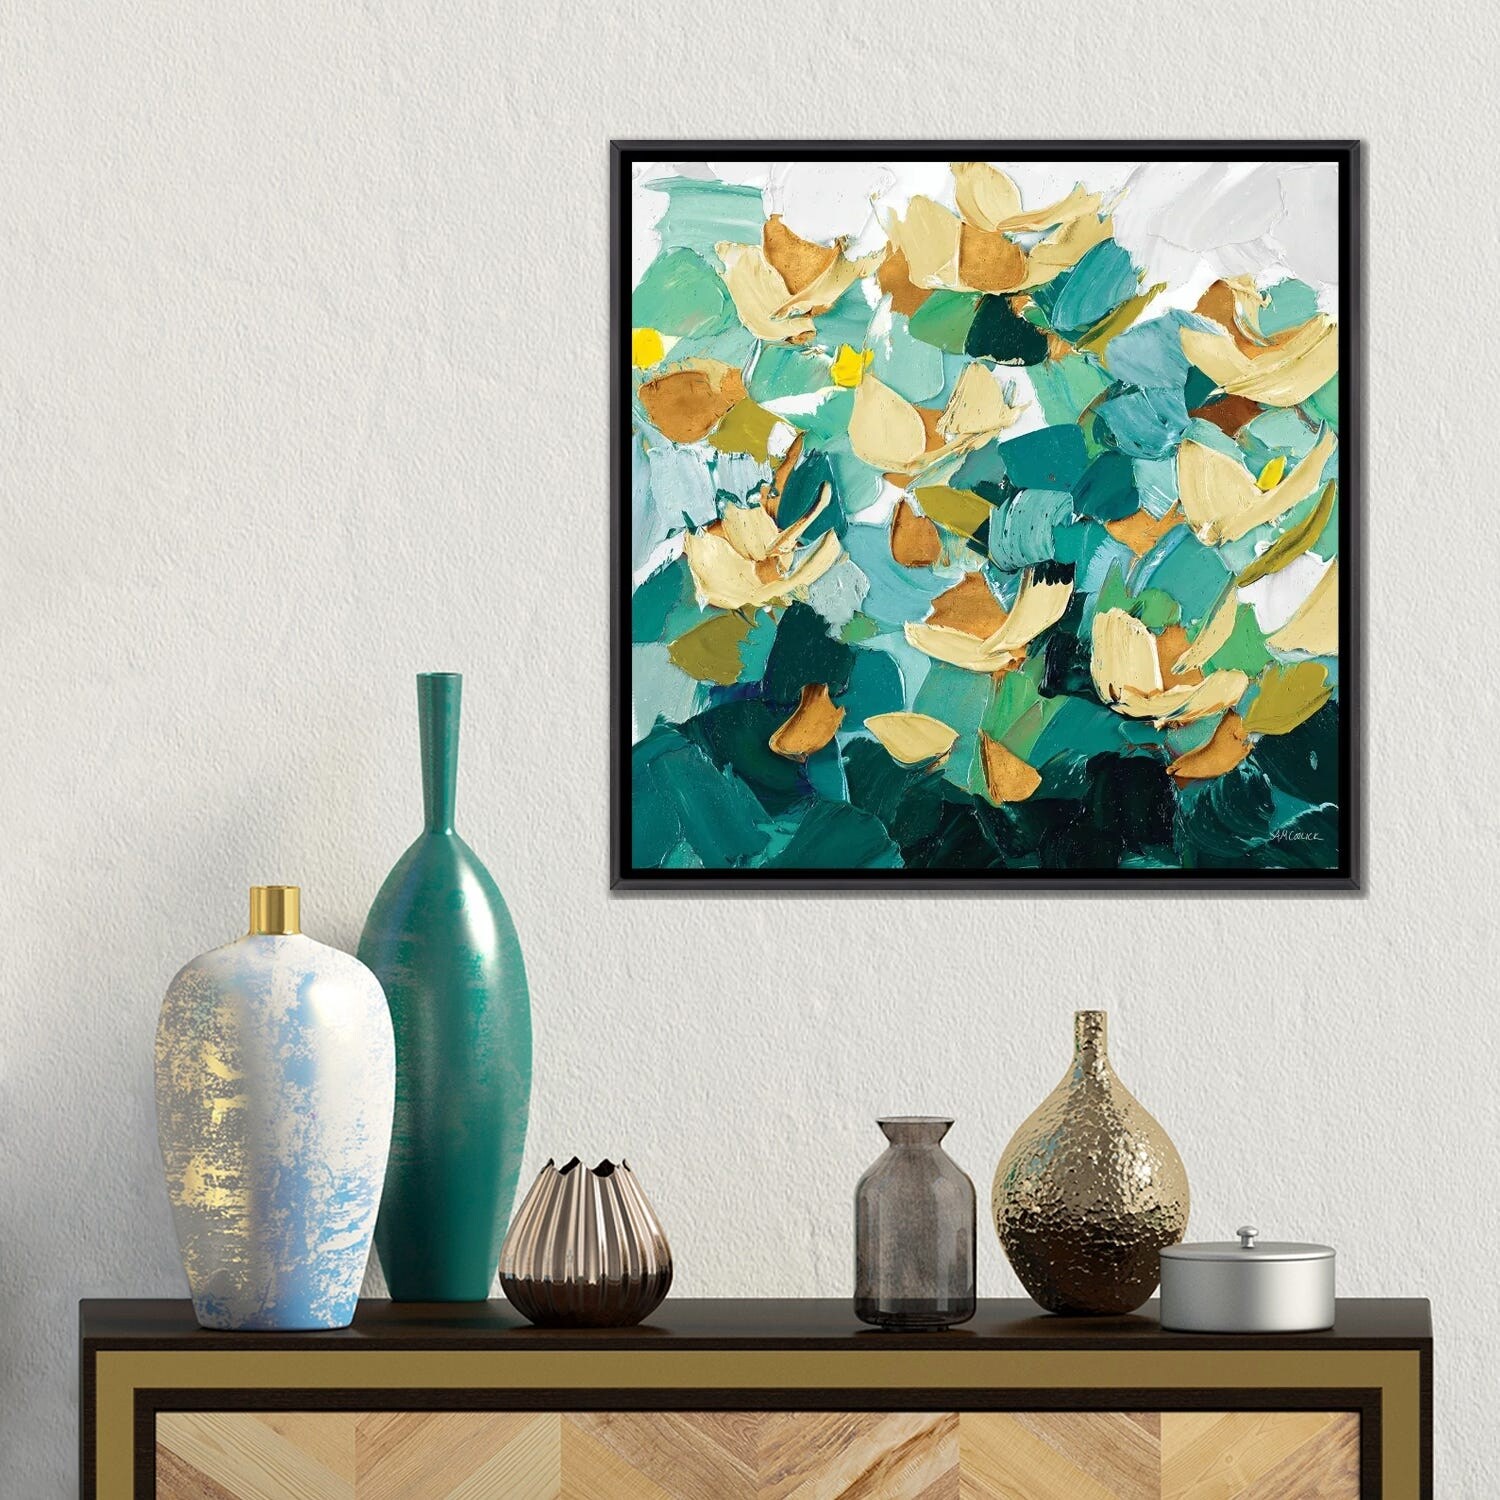 iCanvas "Gold and Teal Dream" by Ann Marie Coolick Framed